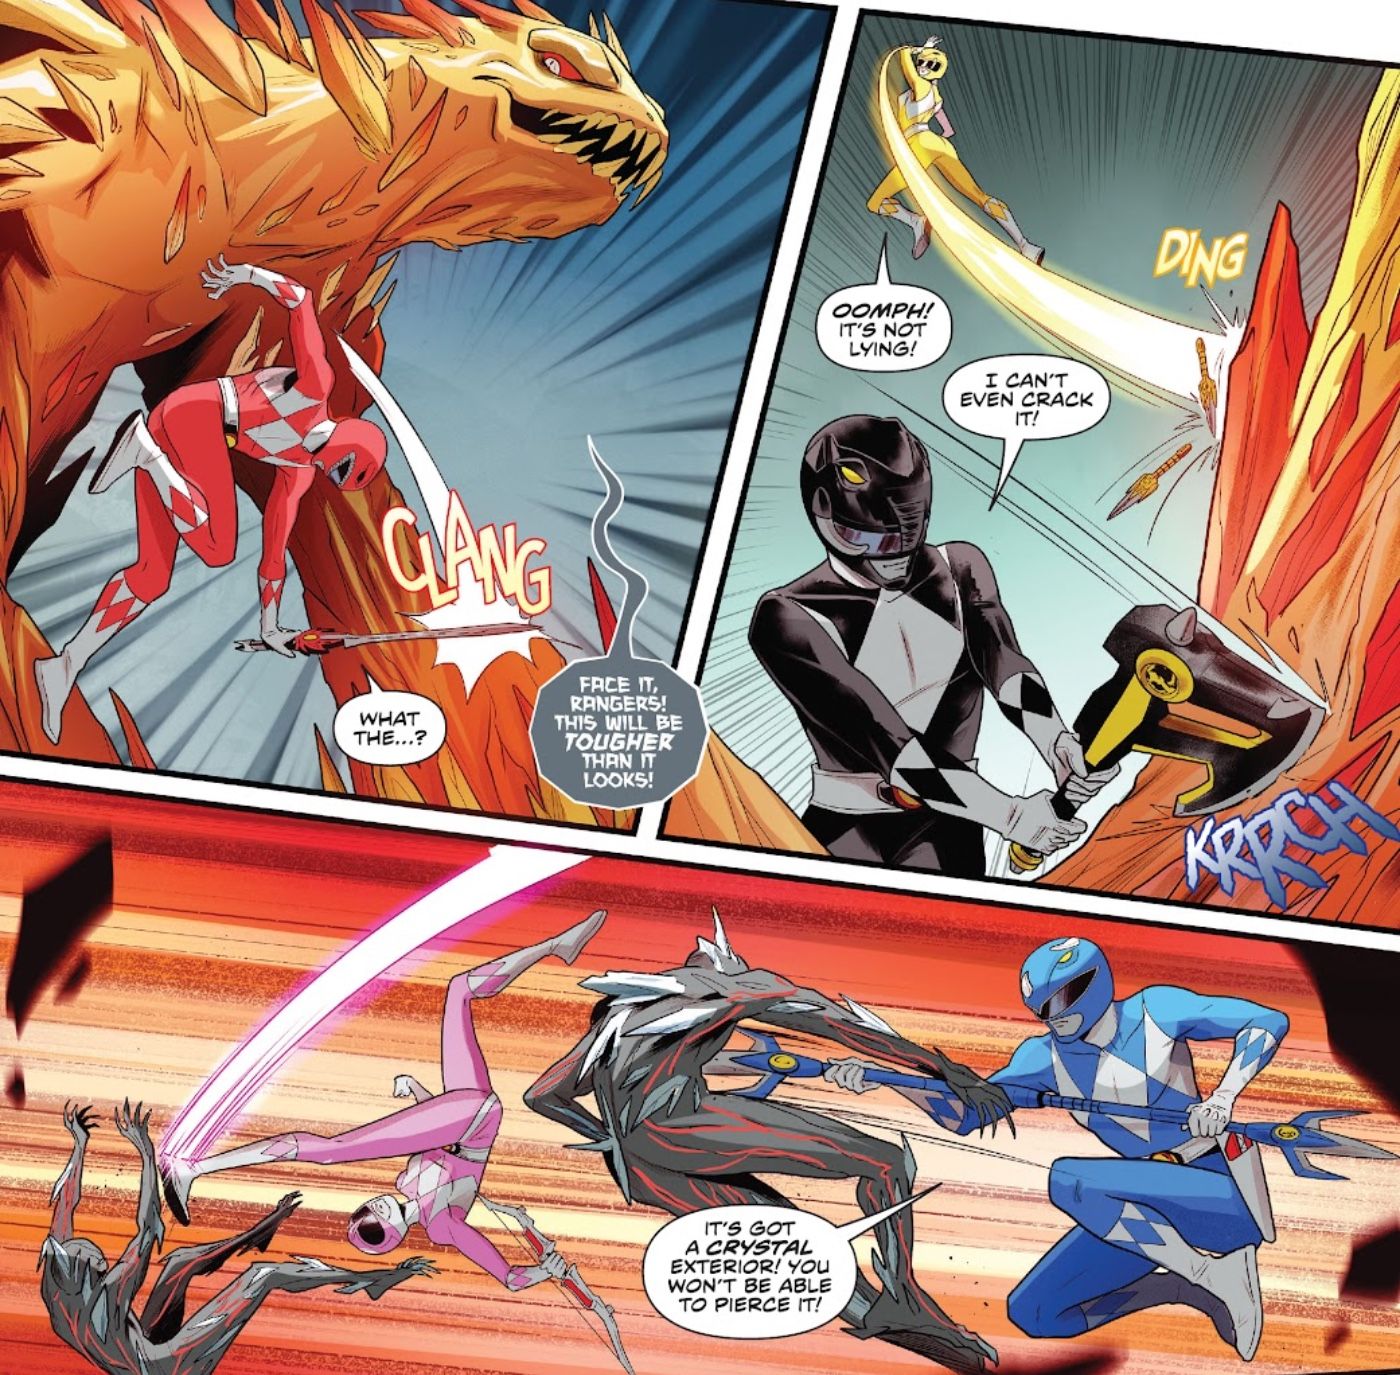 Power Rangers Confirm Their Weapons Are Useless Against One Material